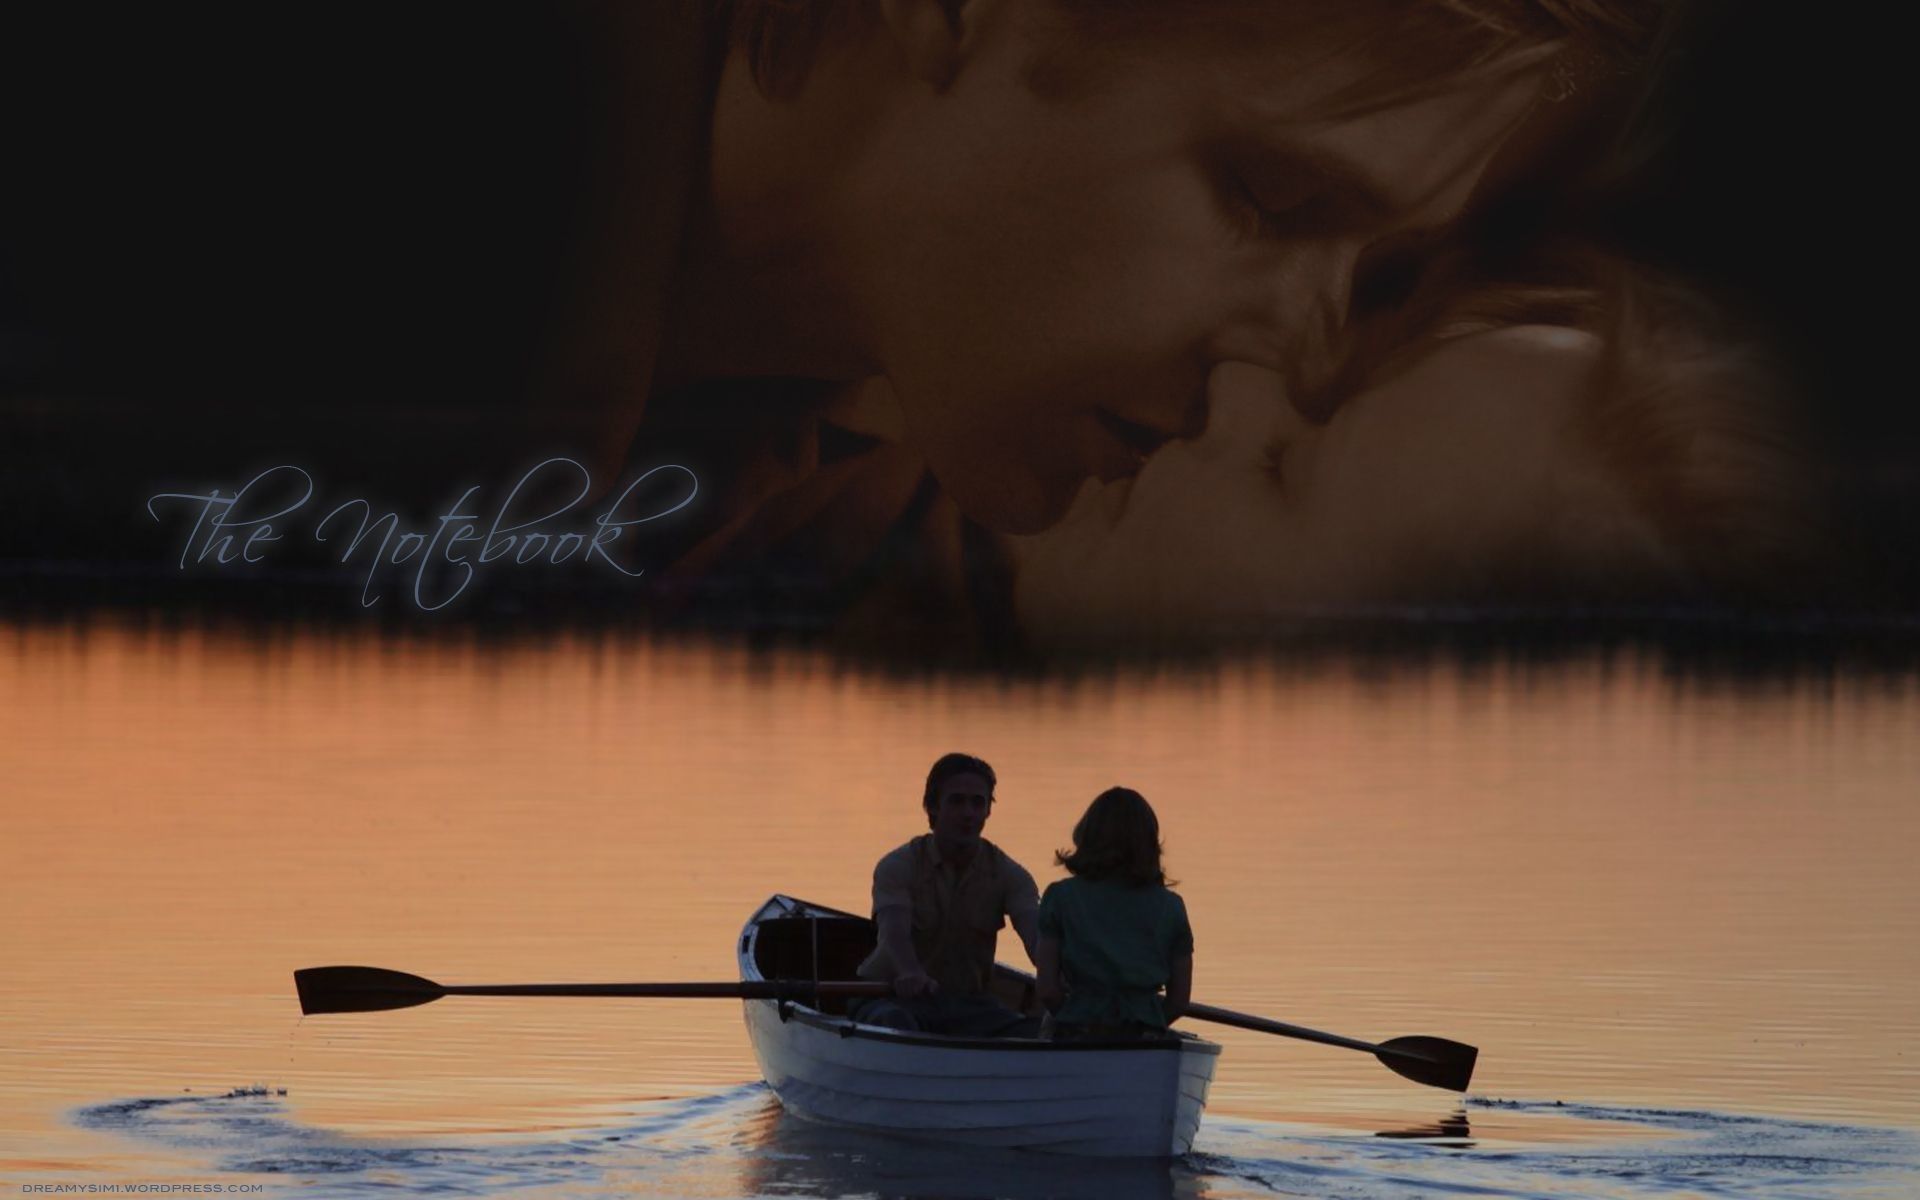 The Notebook Movie Wallpapers Wallpaper Cave